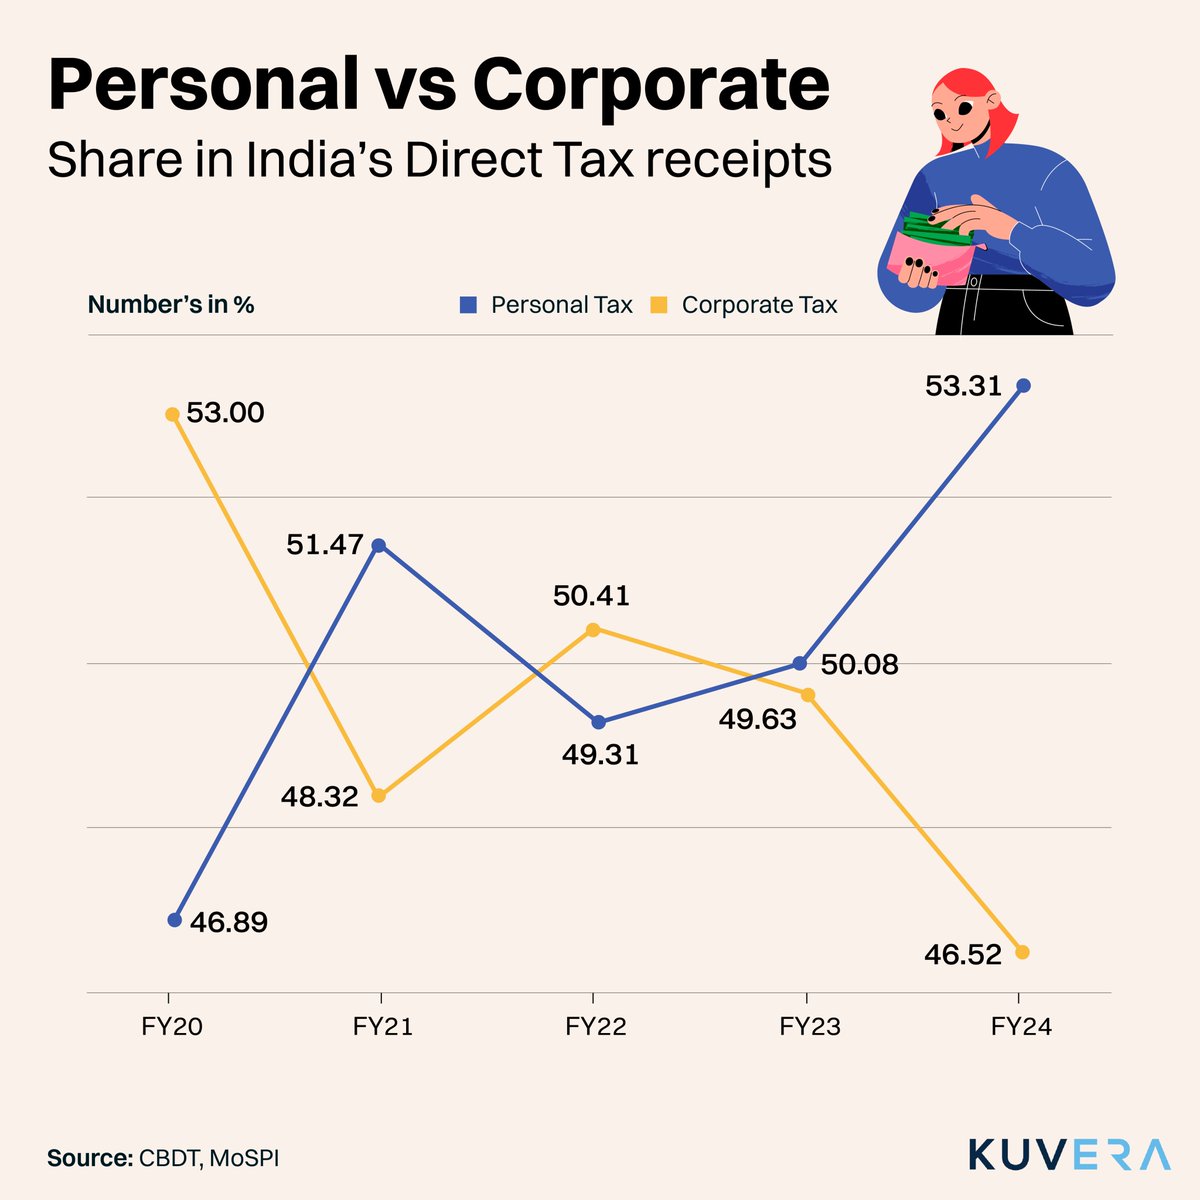 At ₹10.44 trillion India's personal income tax collections in FY 2023 overtook corporate tax for the 2nd year running, accounting for 53.31% of direct tax receipts. This reflects a global trend seen in countries like the US, Canada & the UK.

#ChartOfTheDay #taxes